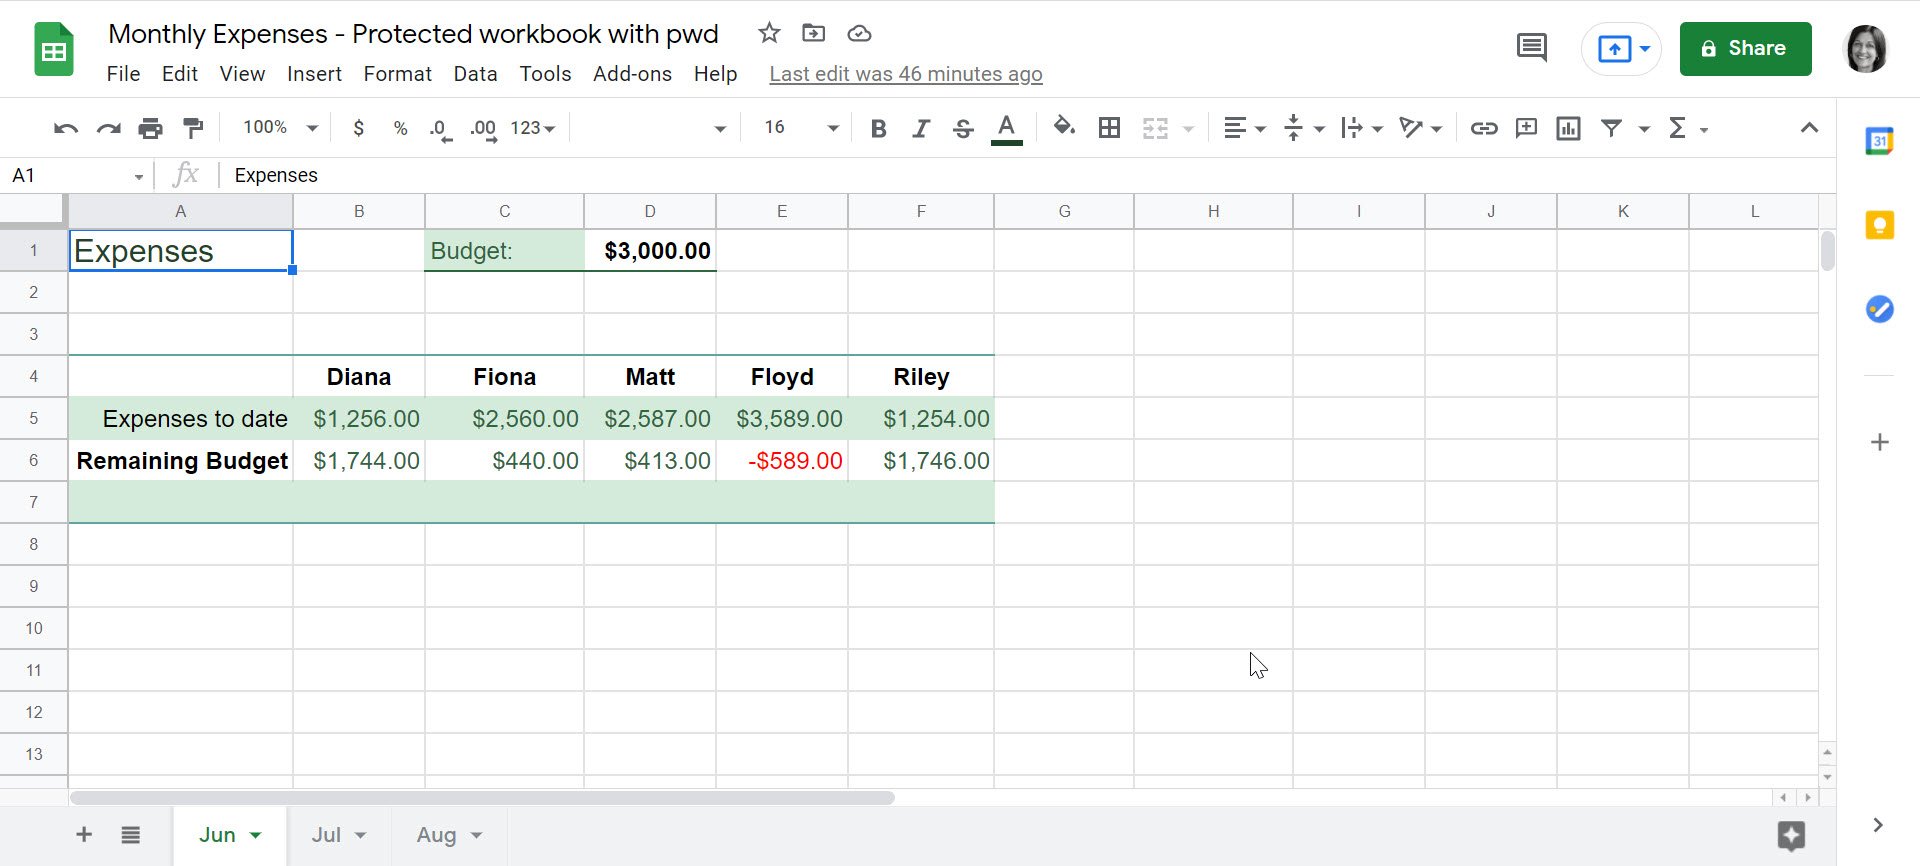 Monthly Expenses - Protected workbook with pwd opened in Google Sheets